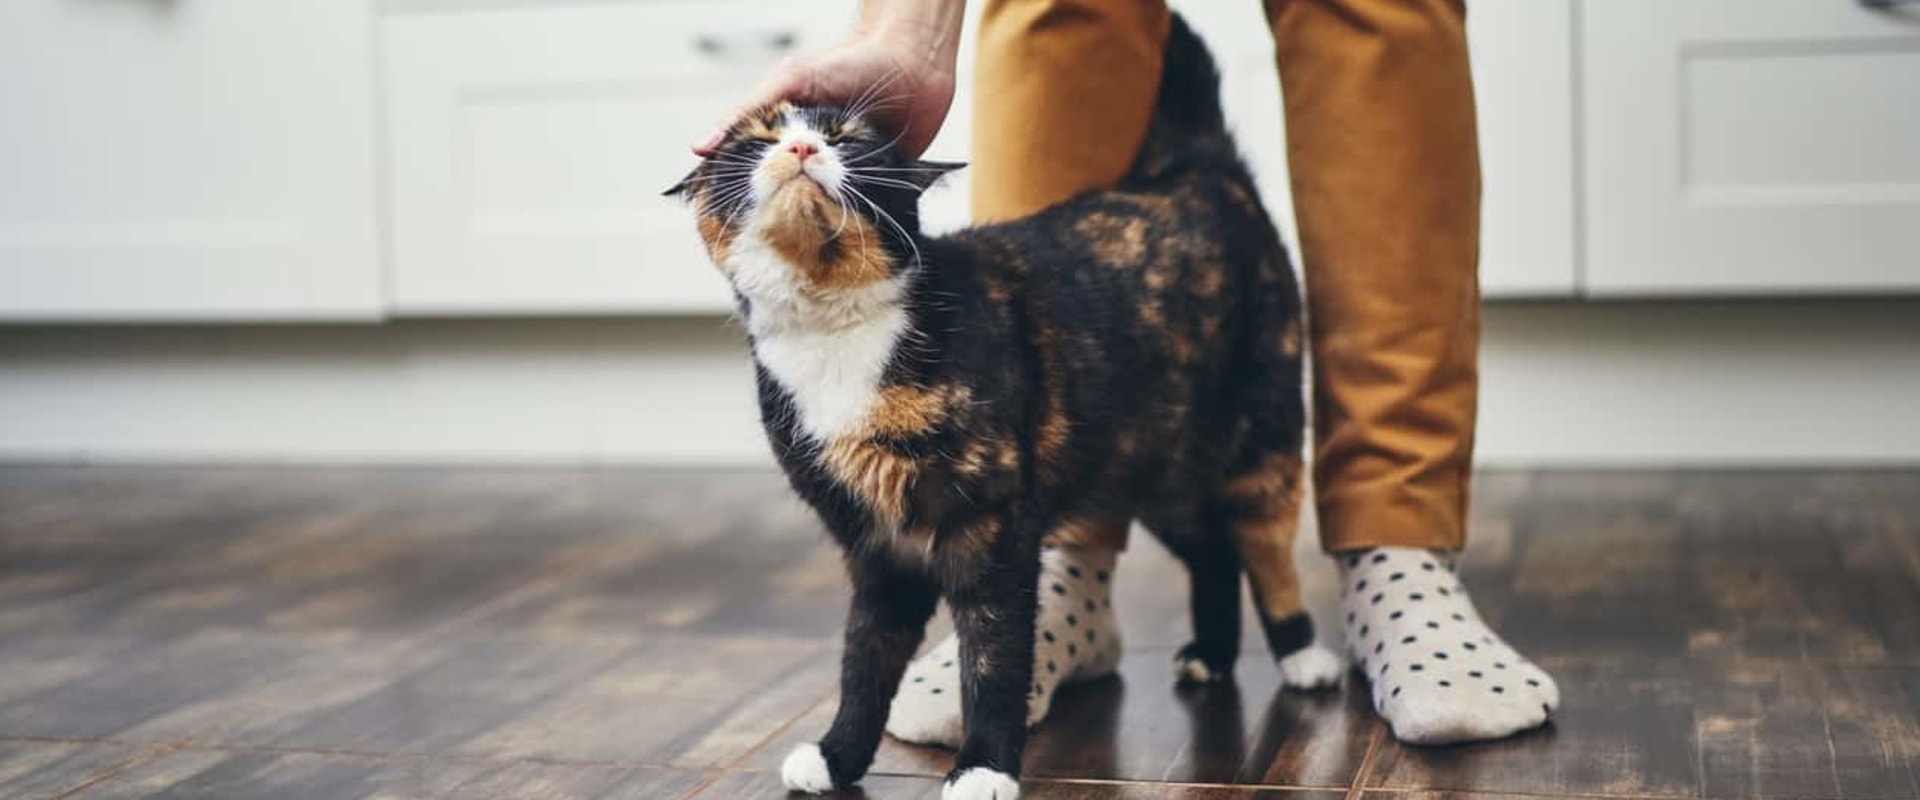 Cat Body Language and Communication - An Overview